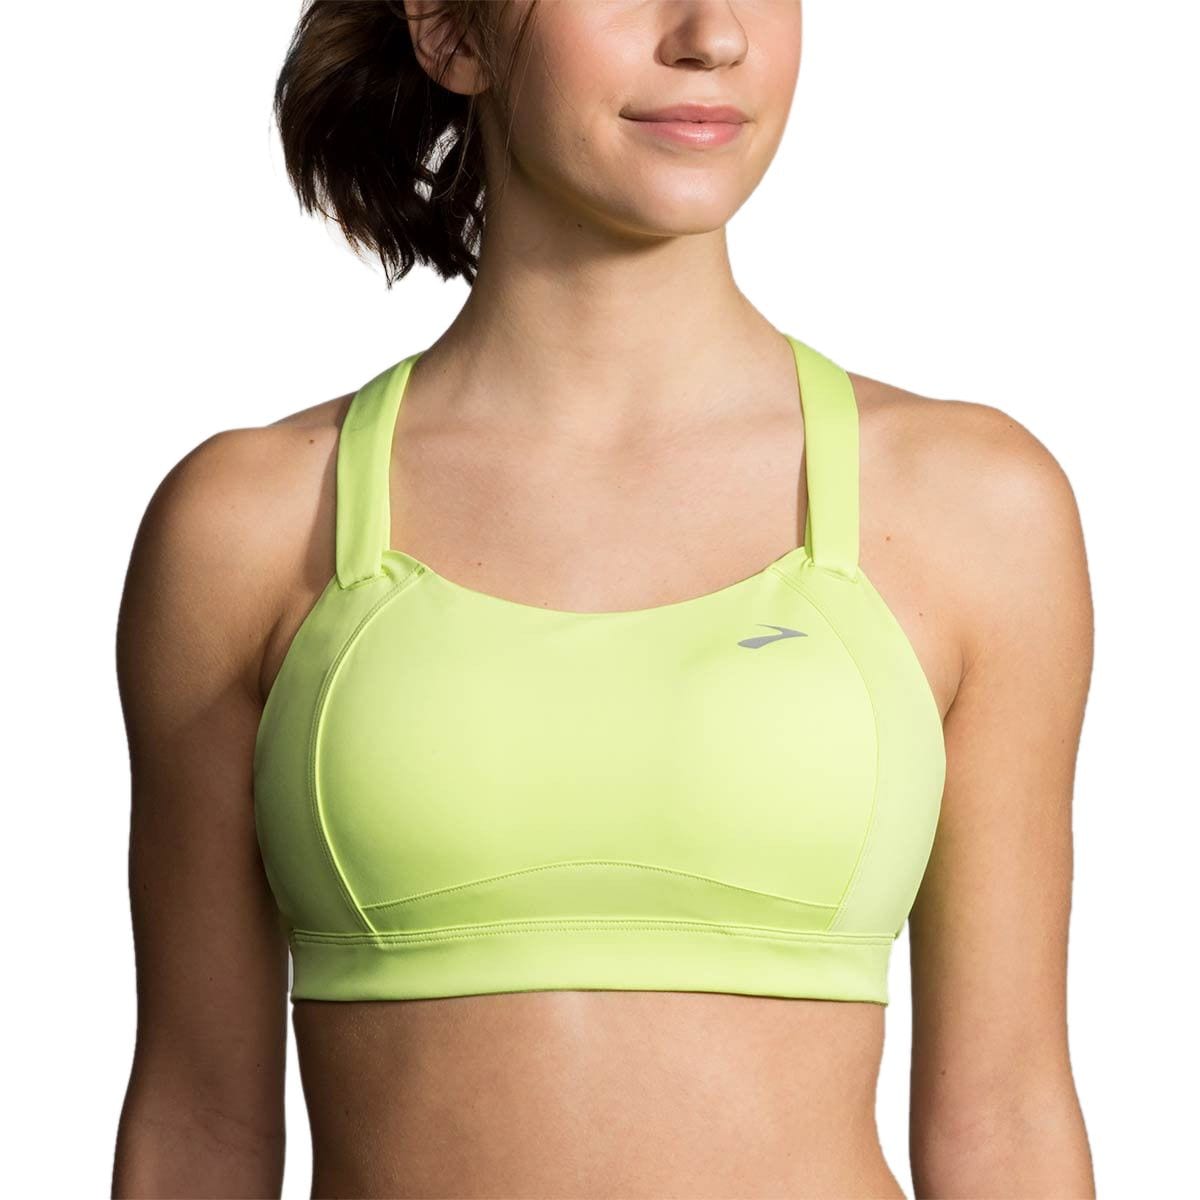 Best Price Reduced! Moving Comfort Juno Sports Bra 36c for sale in